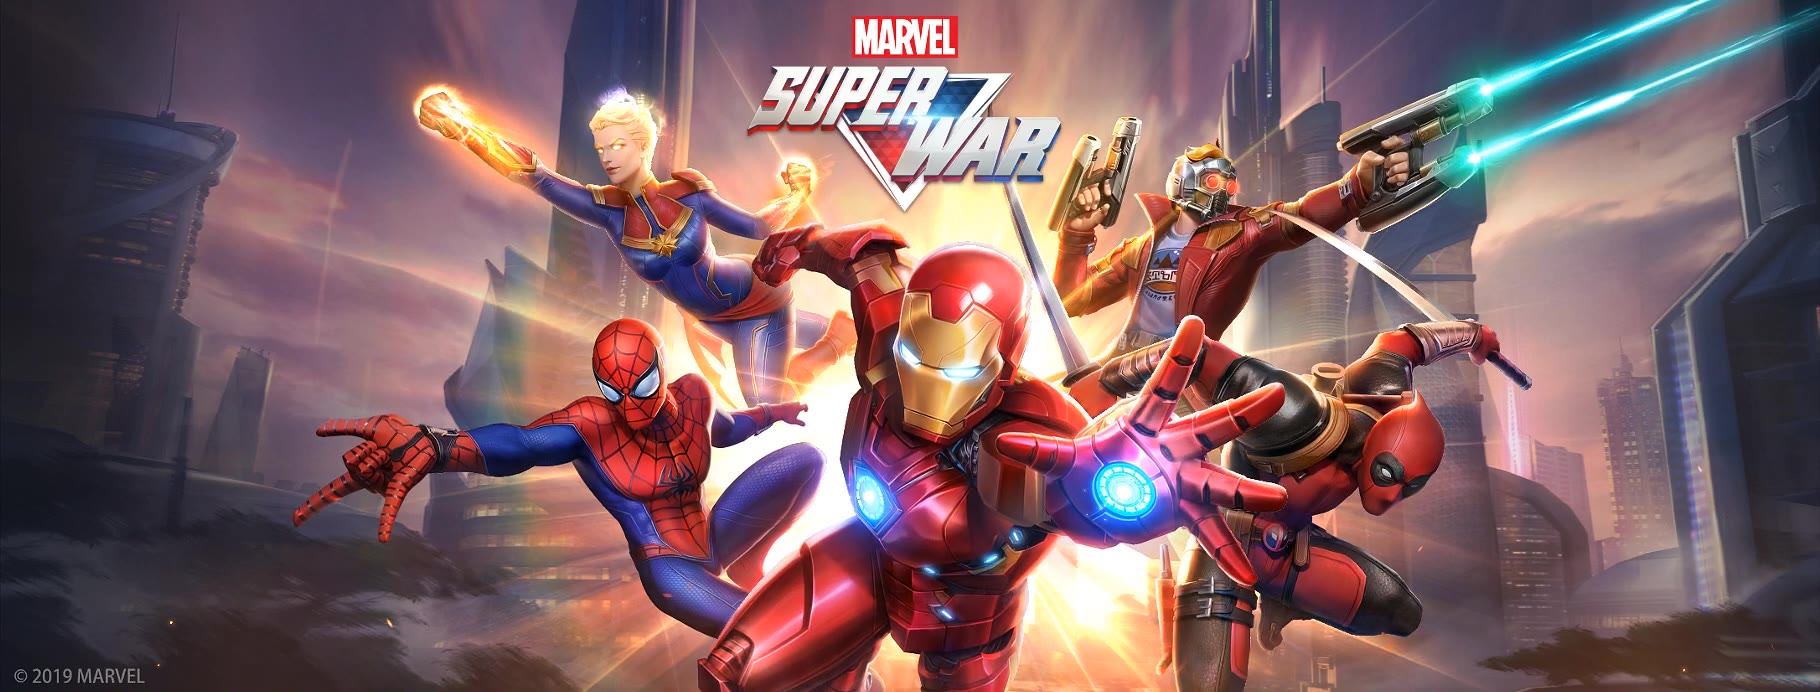 &#91;Android/iOS&#93; MARVEL Super War